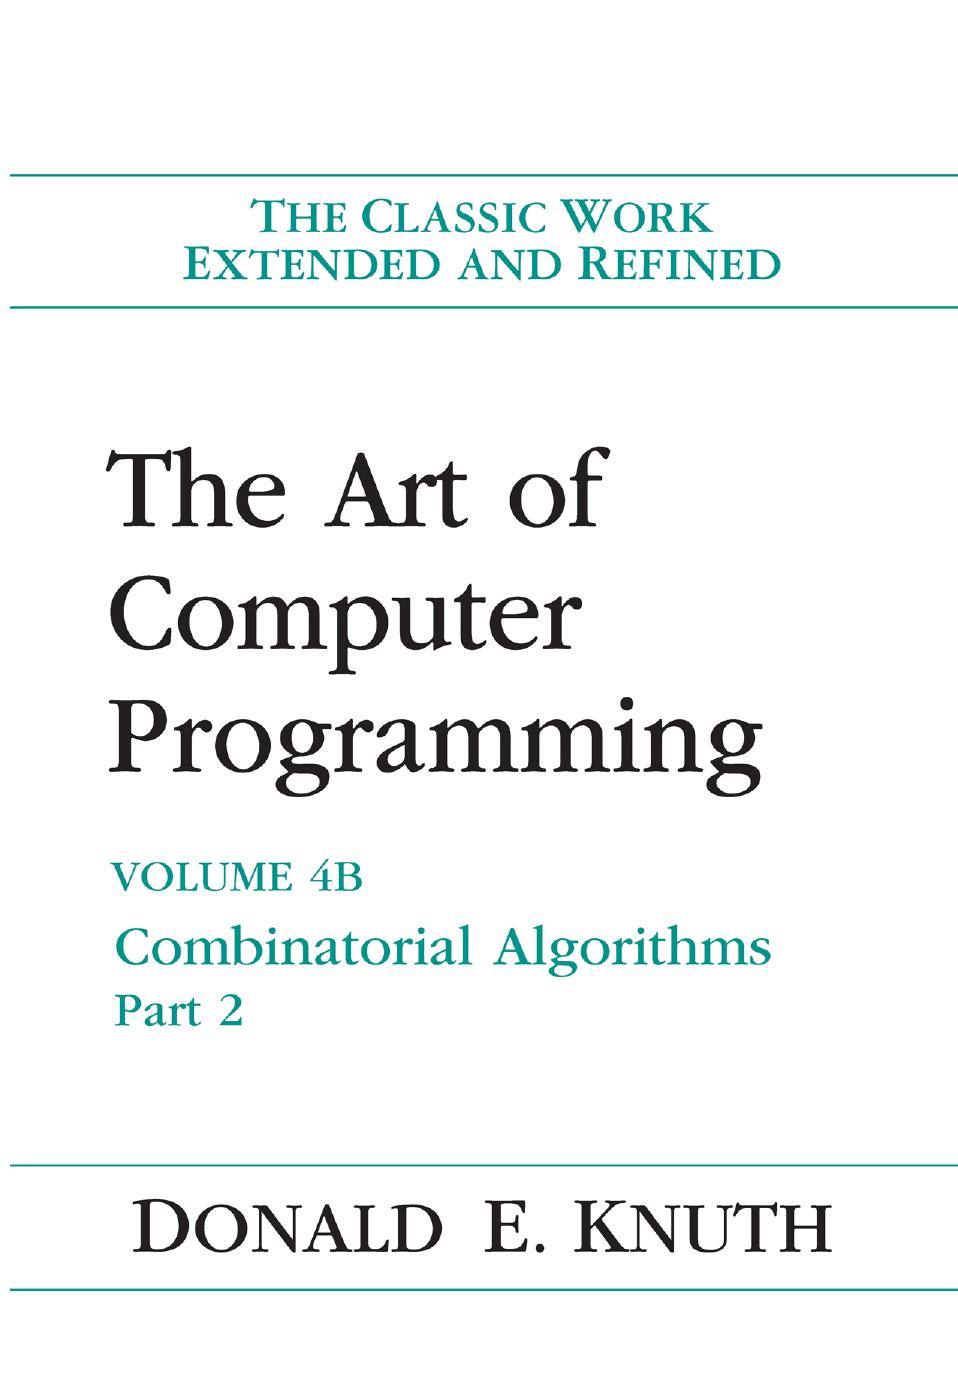 The Art of Computer Programming: Volume 4B: Combinatorial Algorithms Part 2 by Donald Knuth